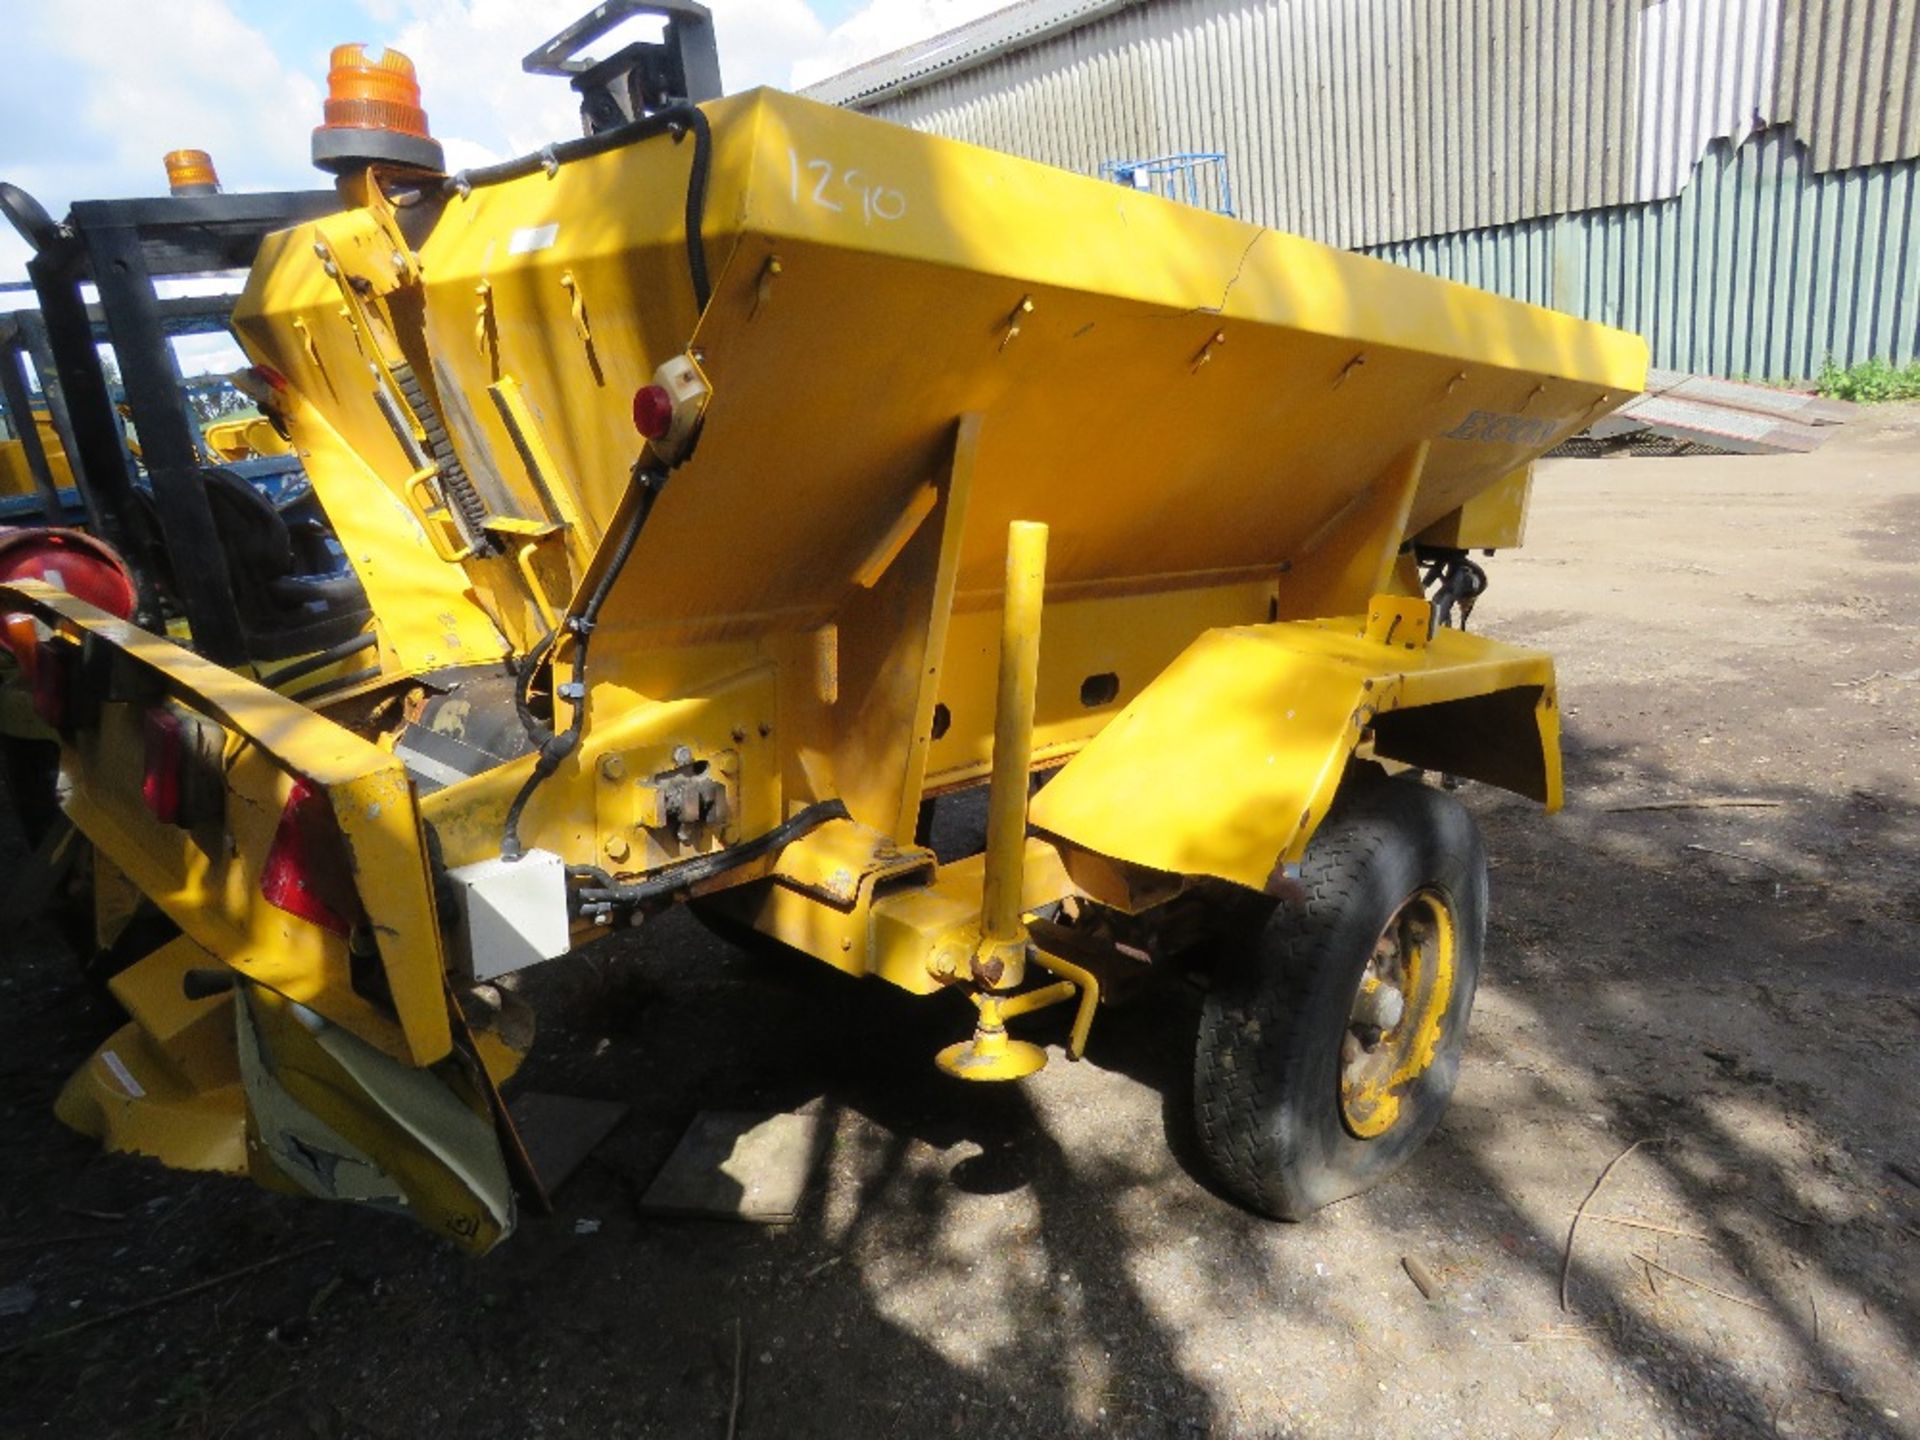 CHARITY LOT!! ECON SINGLE AXLED TOWED SALT SPREADER WITH WHEEL DRIVEN HYDRAULIC SYSTEM. UNUSED FOR - Image 2 of 13